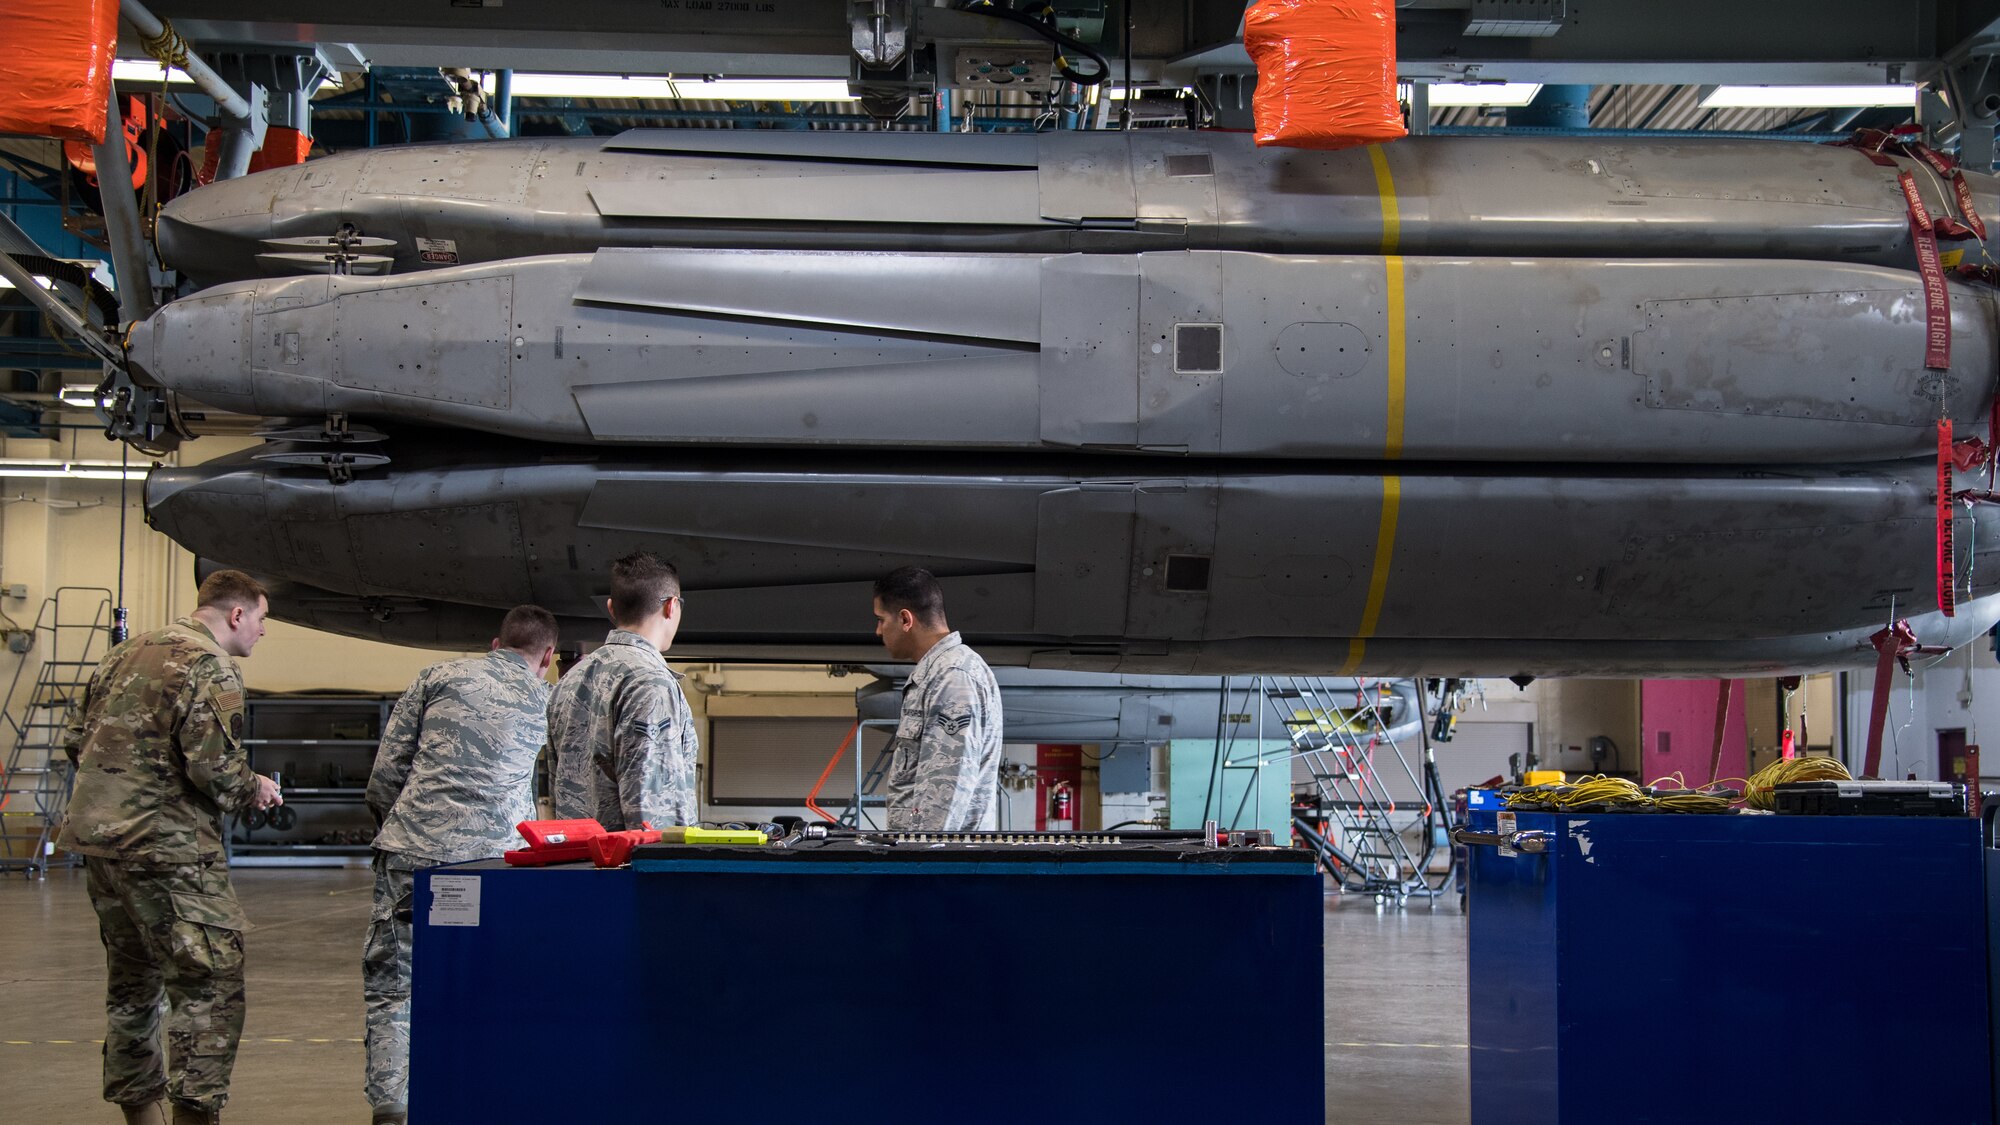 Airmen from the 2nd Munitions Squadron prepare to download the final Conventional Air-Launched Cruise Missile (CALCM) at Barksdale Air Force Base, La., Nov. 20, 2019. The 2nd MUNS loaded the final CALCM missile package into a launcher in order to disassemble the weapon to become demilitarized. (U.S. Air Force photo by Airman 1st Class Jacob B. Wrightsman)